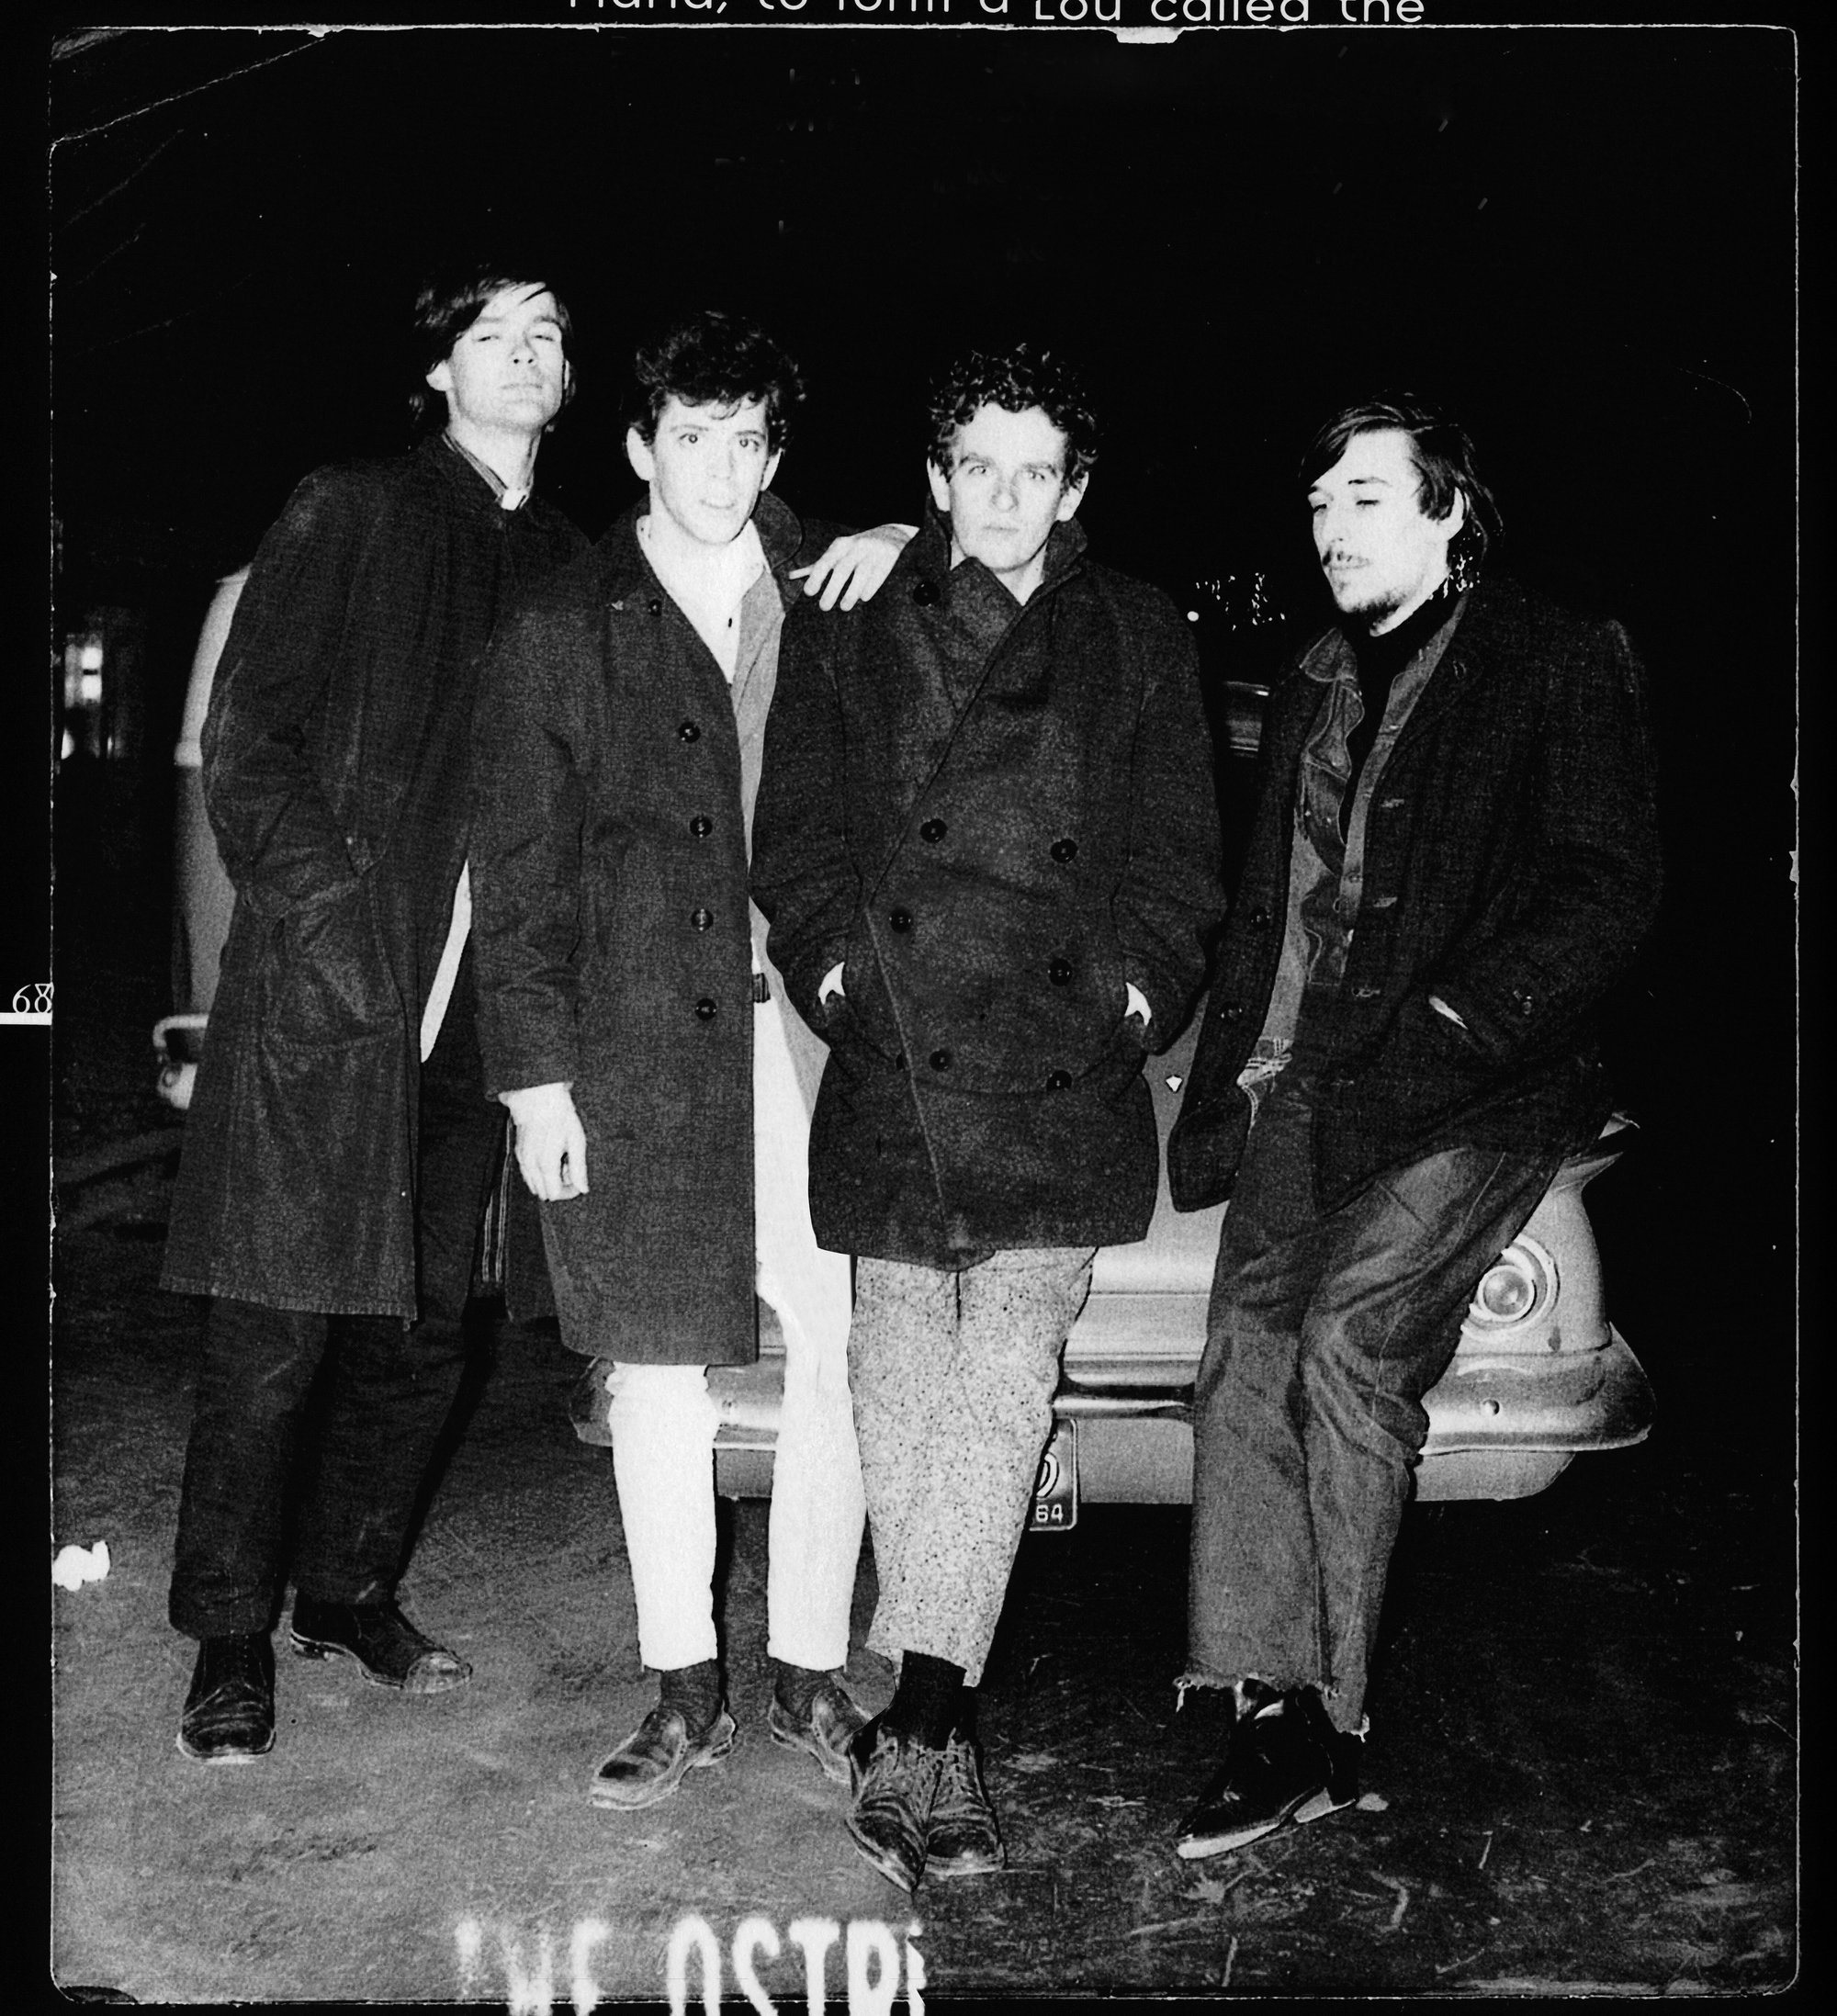 The Primitives, a precursor to The Velvet Underground, in 1965. From left, Tony Conrad, Lou Reed, Walter DeMaria and John Cale.